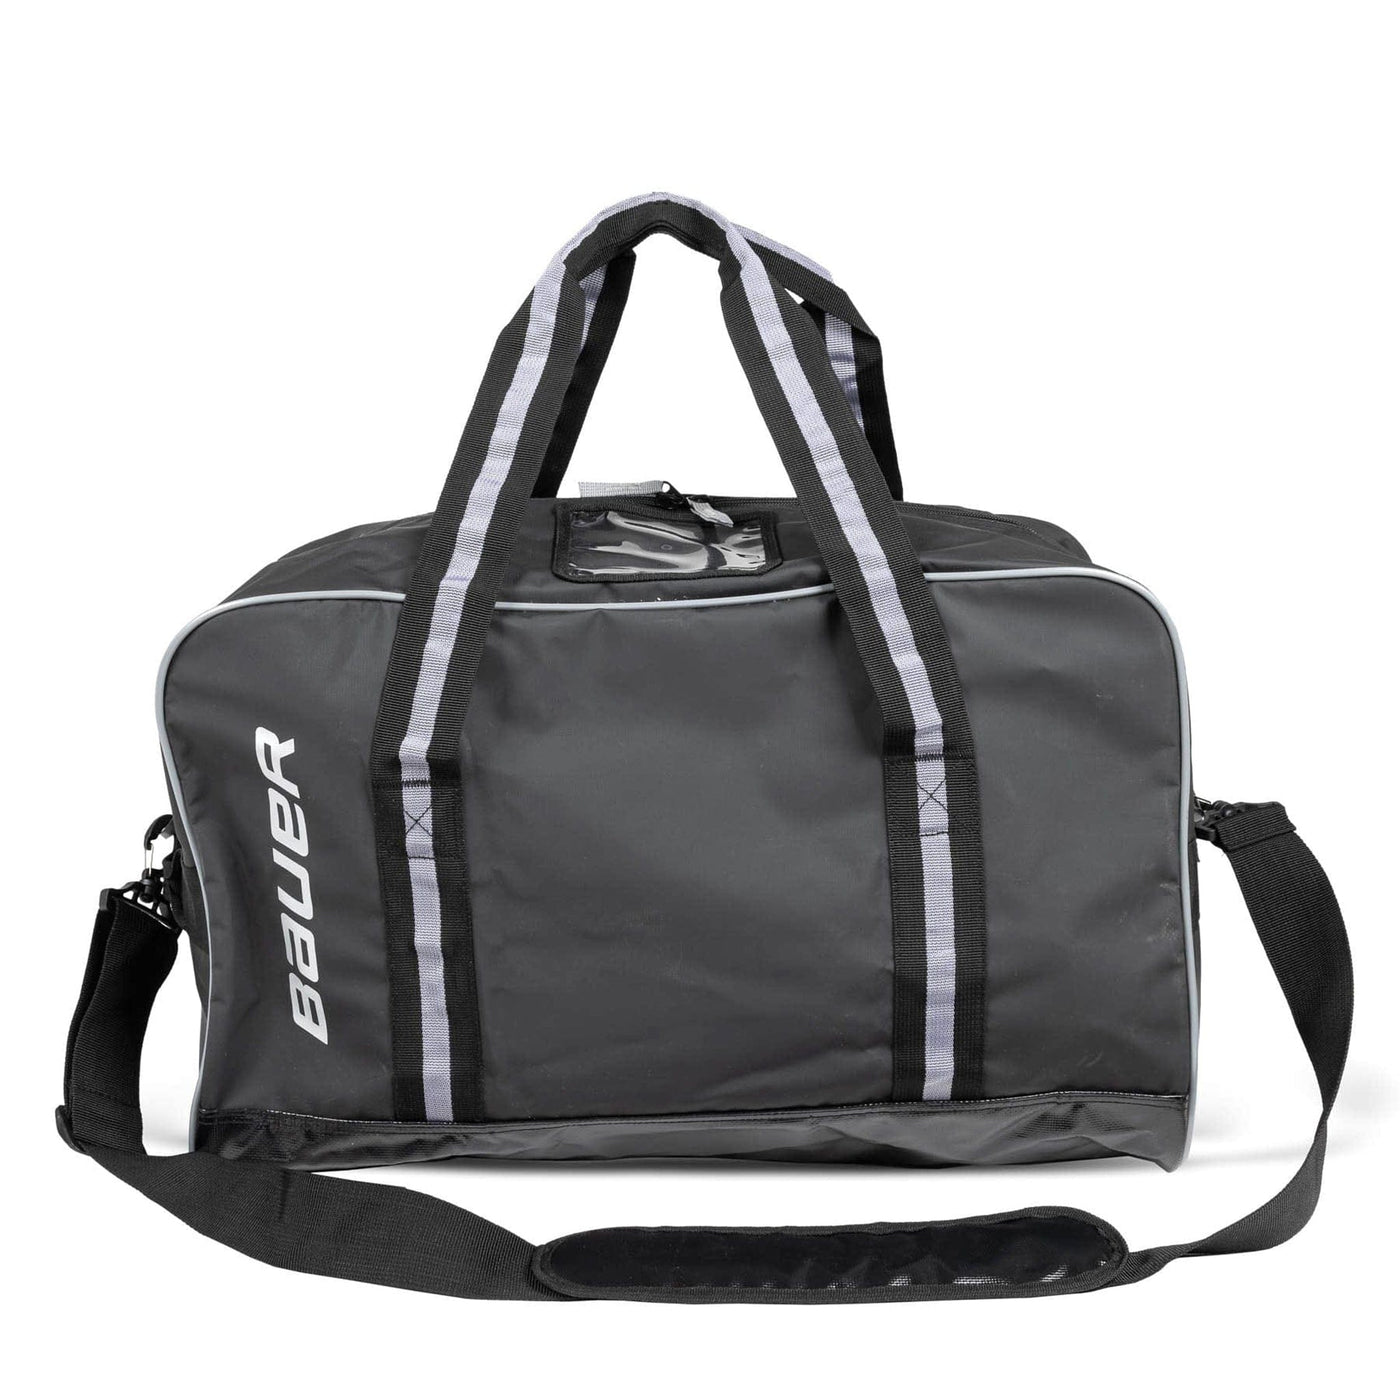 Bauer Team Duffle Bag - The Hockey Shop Source For Sports